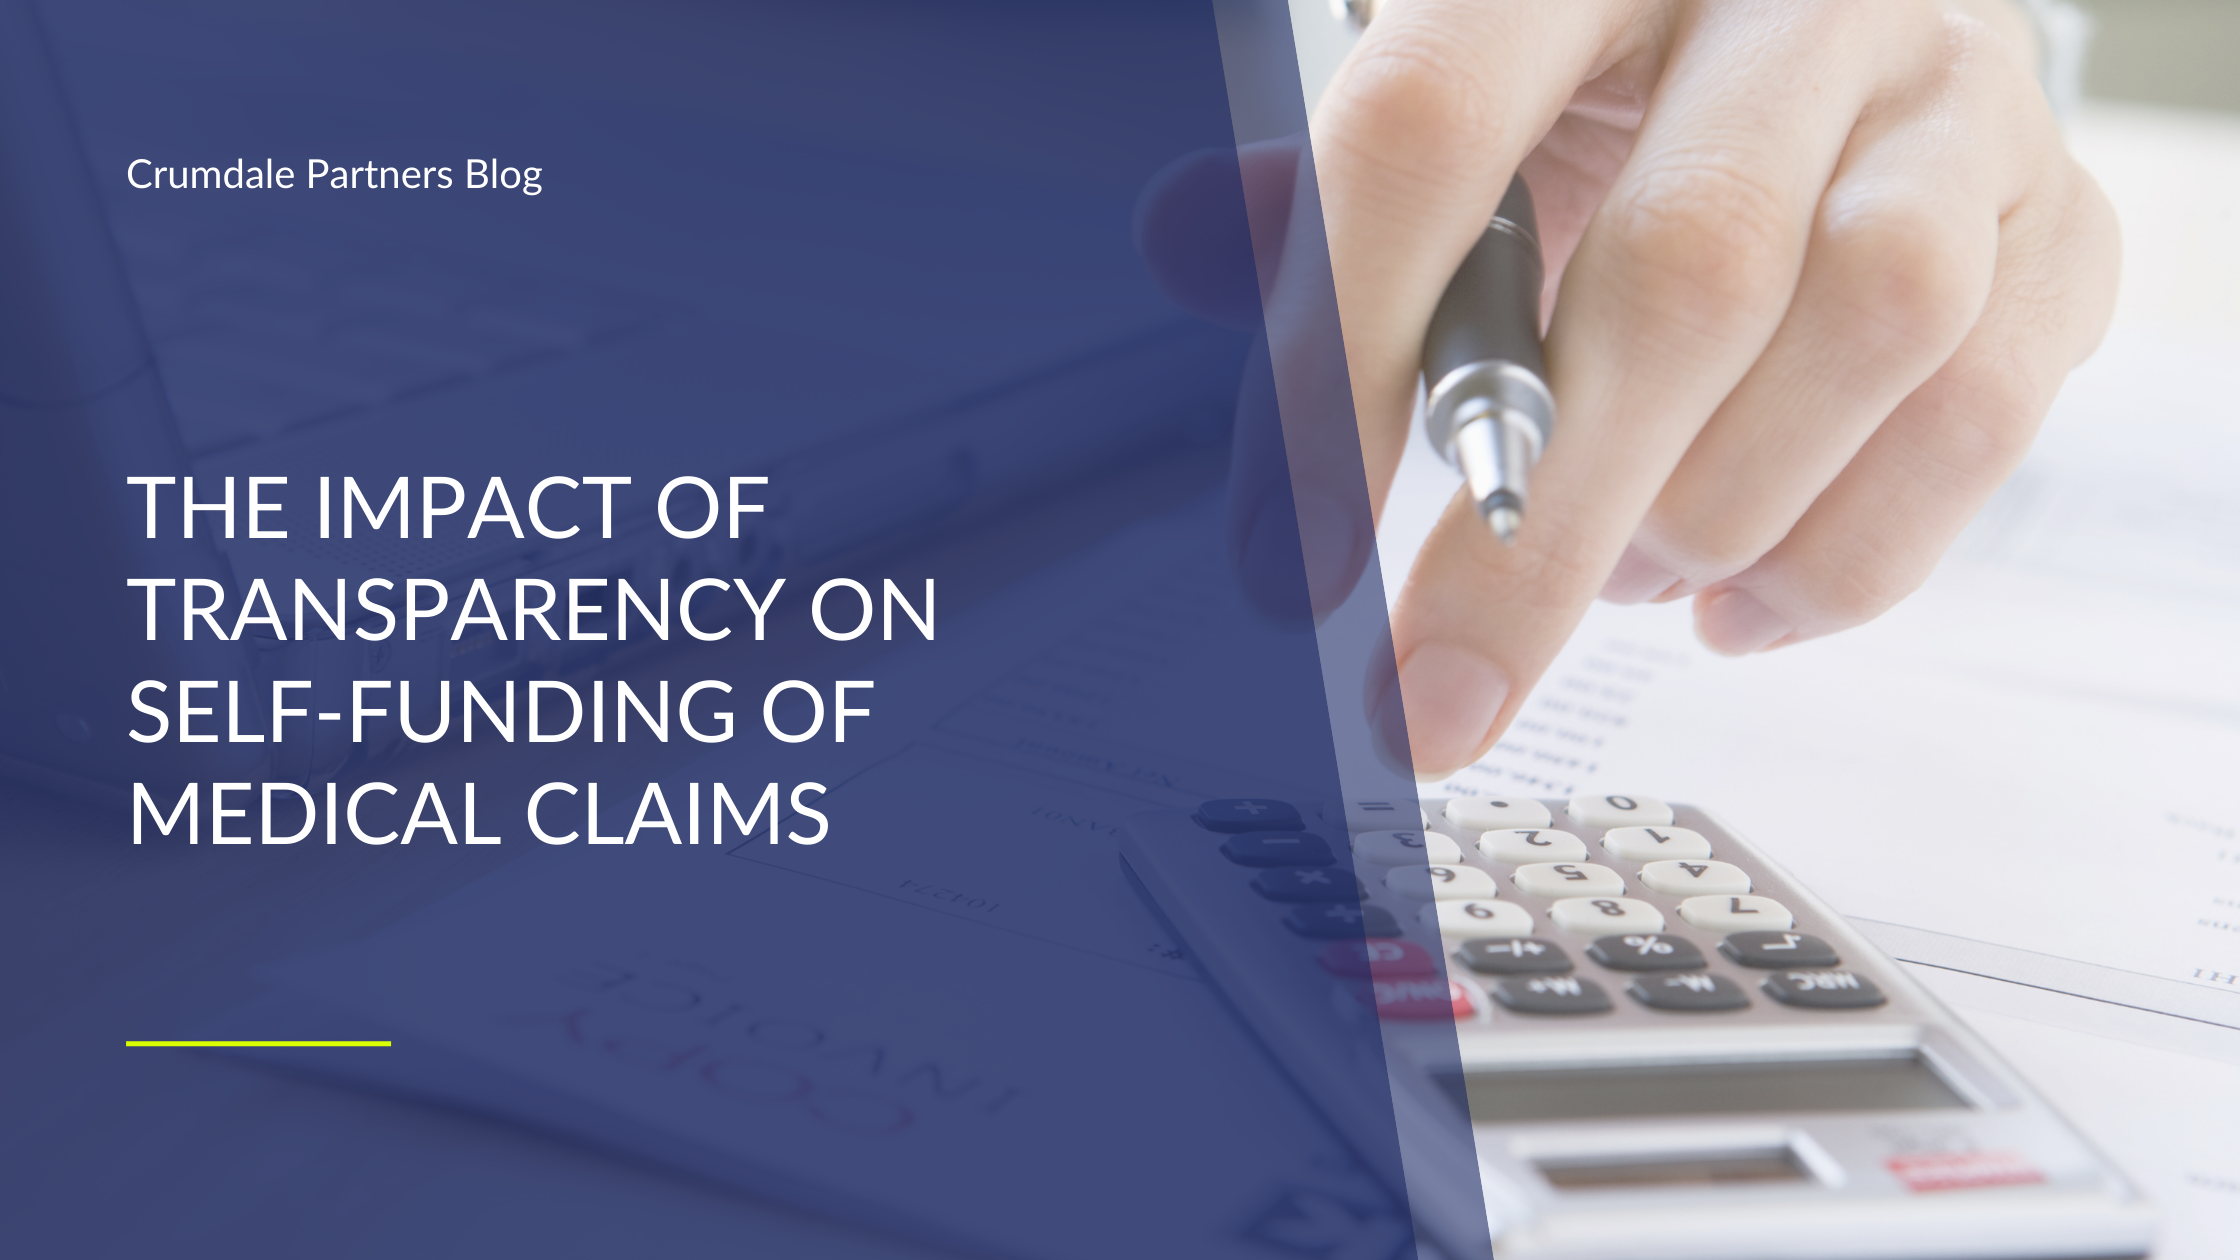 The Impact of Transparency on Self-Funding of Medical Claims